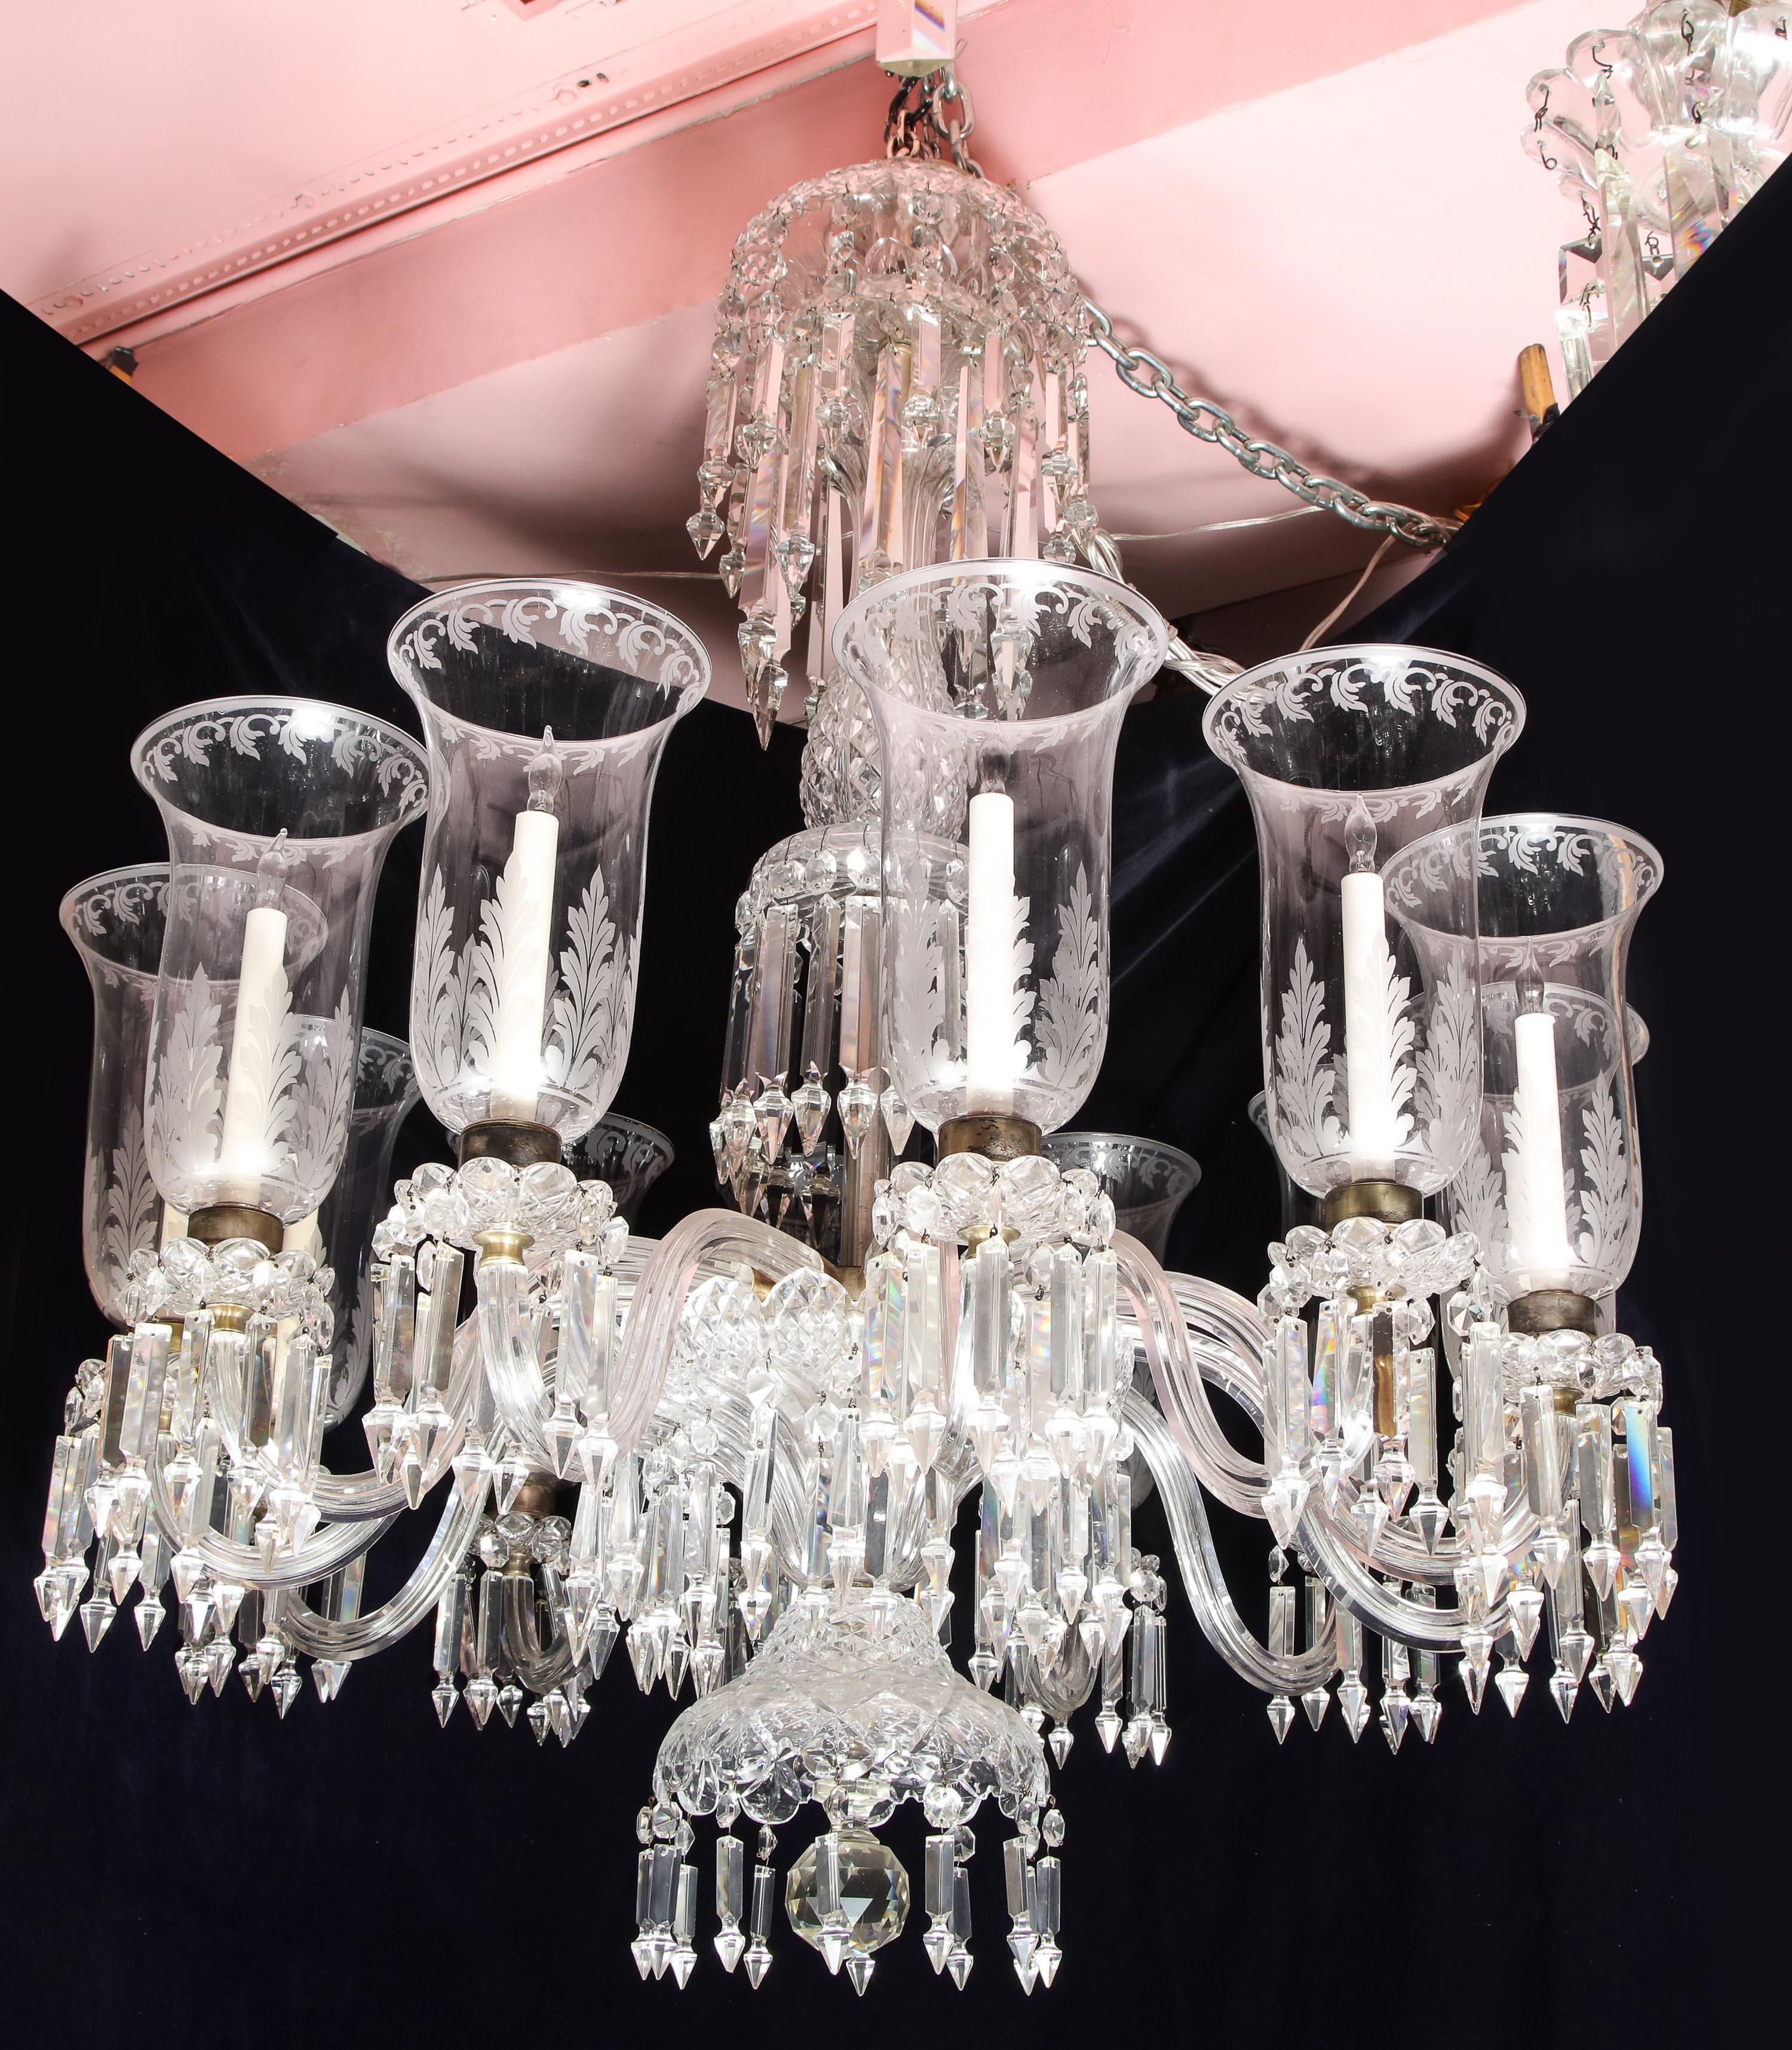 A palatial and large antique French Louis XVI cut crystal multi light chandelier of exceptional craftsmanship embellished with hand handcut crystal arms, cut crystal prisms and further adorned with superb hand acid etched hurricane glass globes